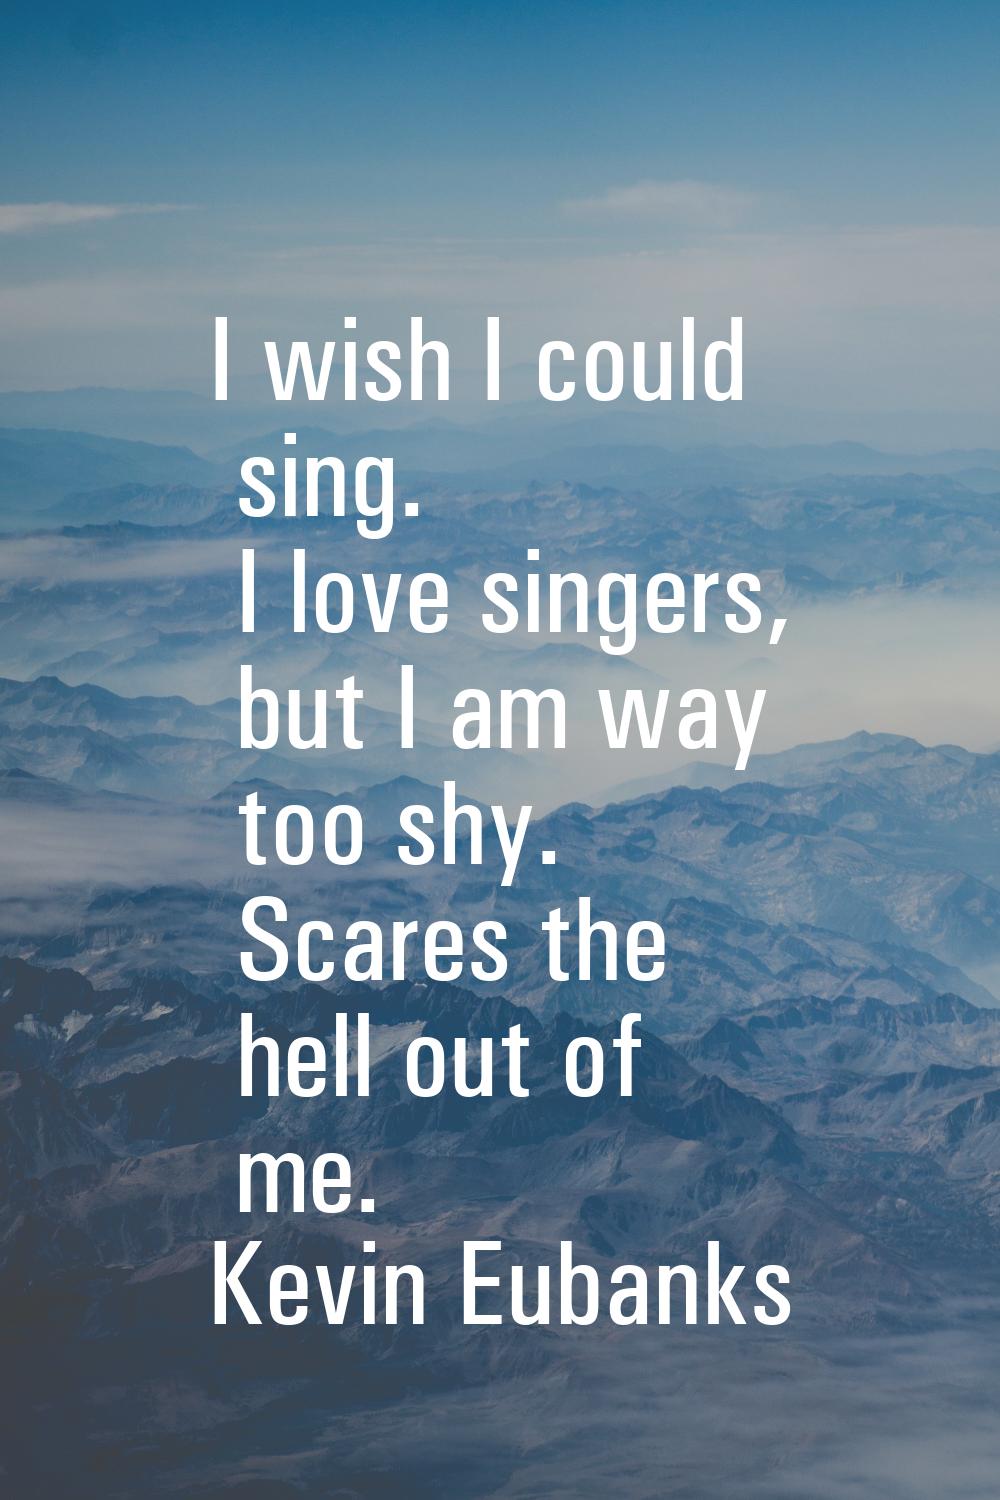 I wish I could sing. I love singers, but I am way too shy. Scares the hell out of me.